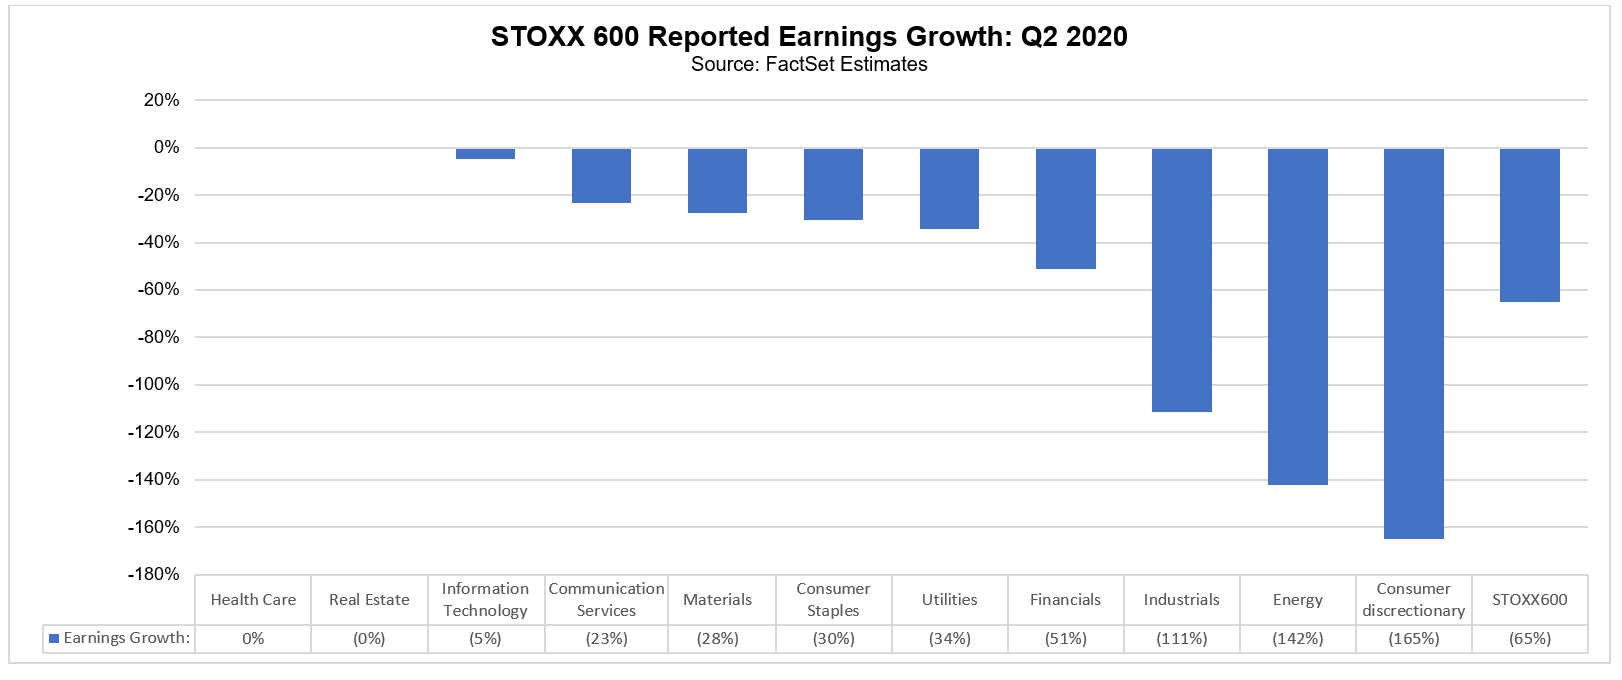 STOXX 600 reported earnings growth Q2 2020